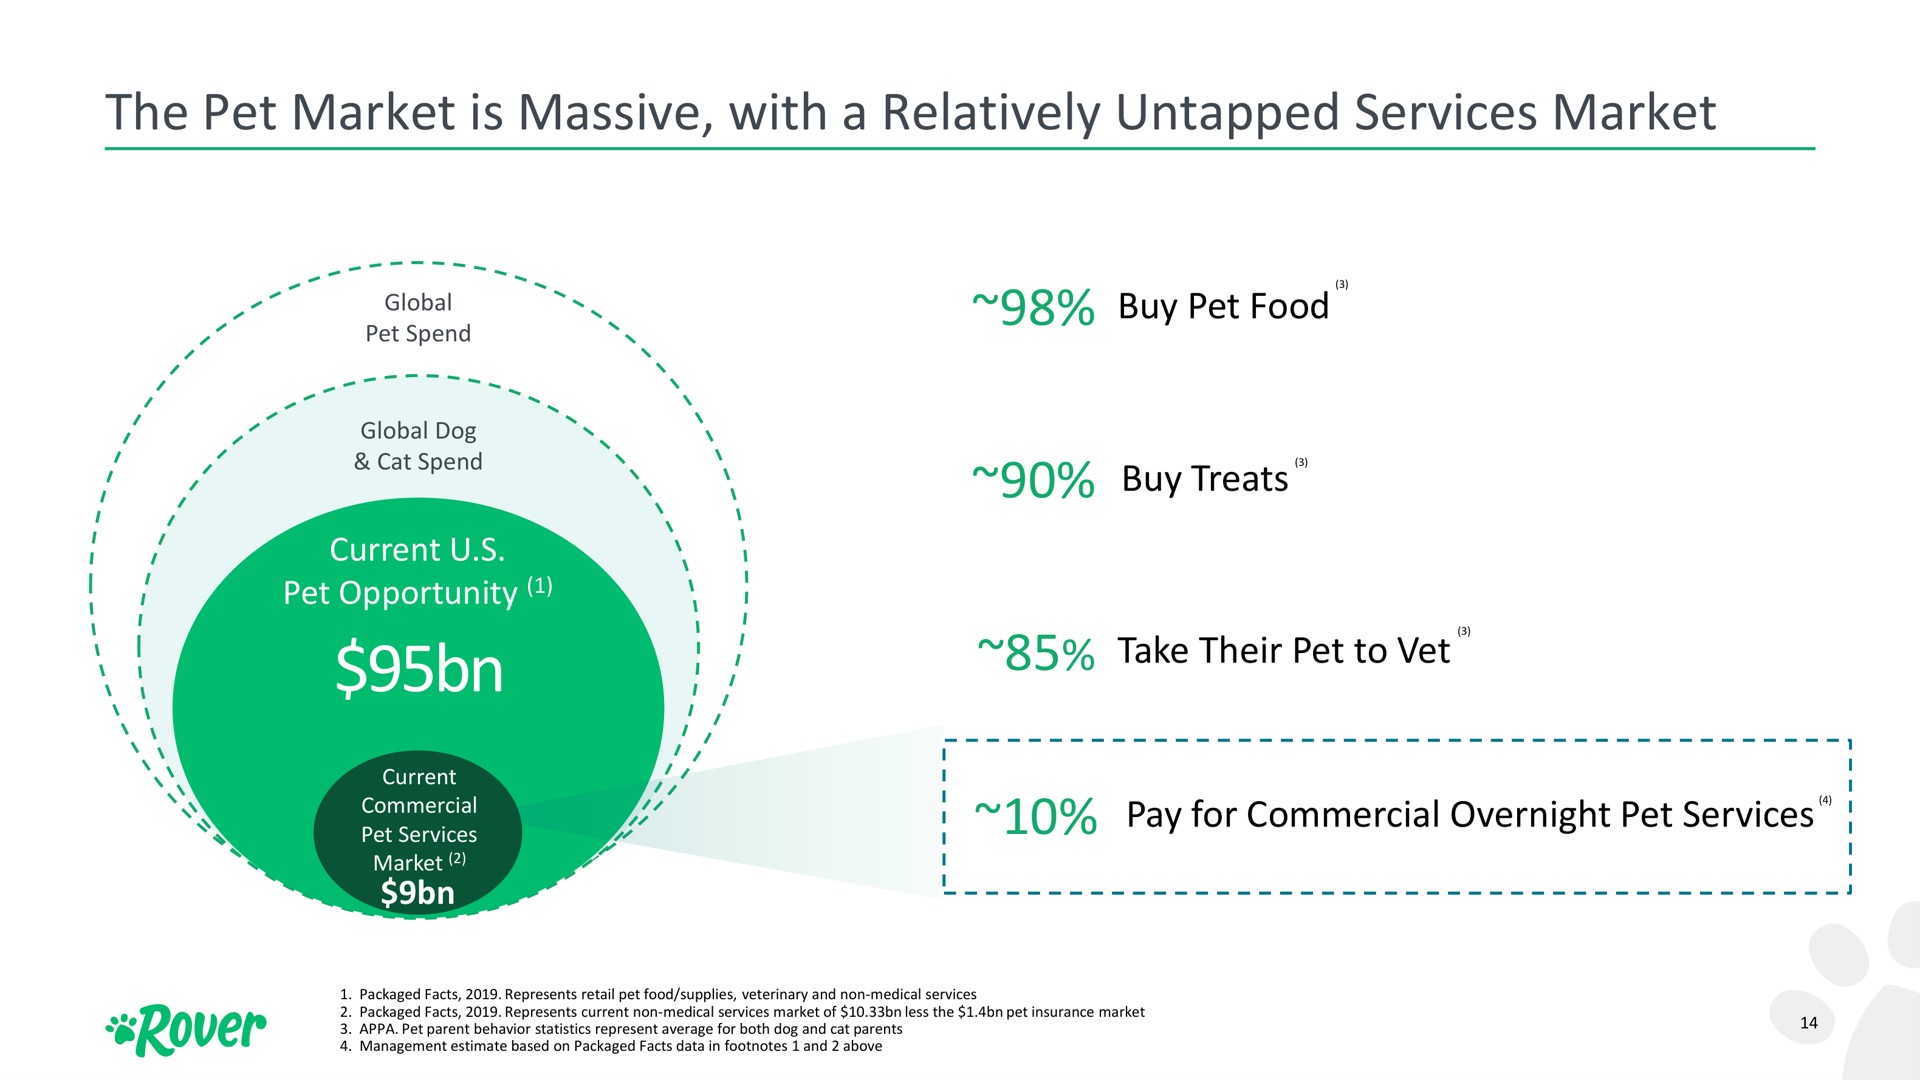 the pet market is massive with a relatively untapped services market | Rover